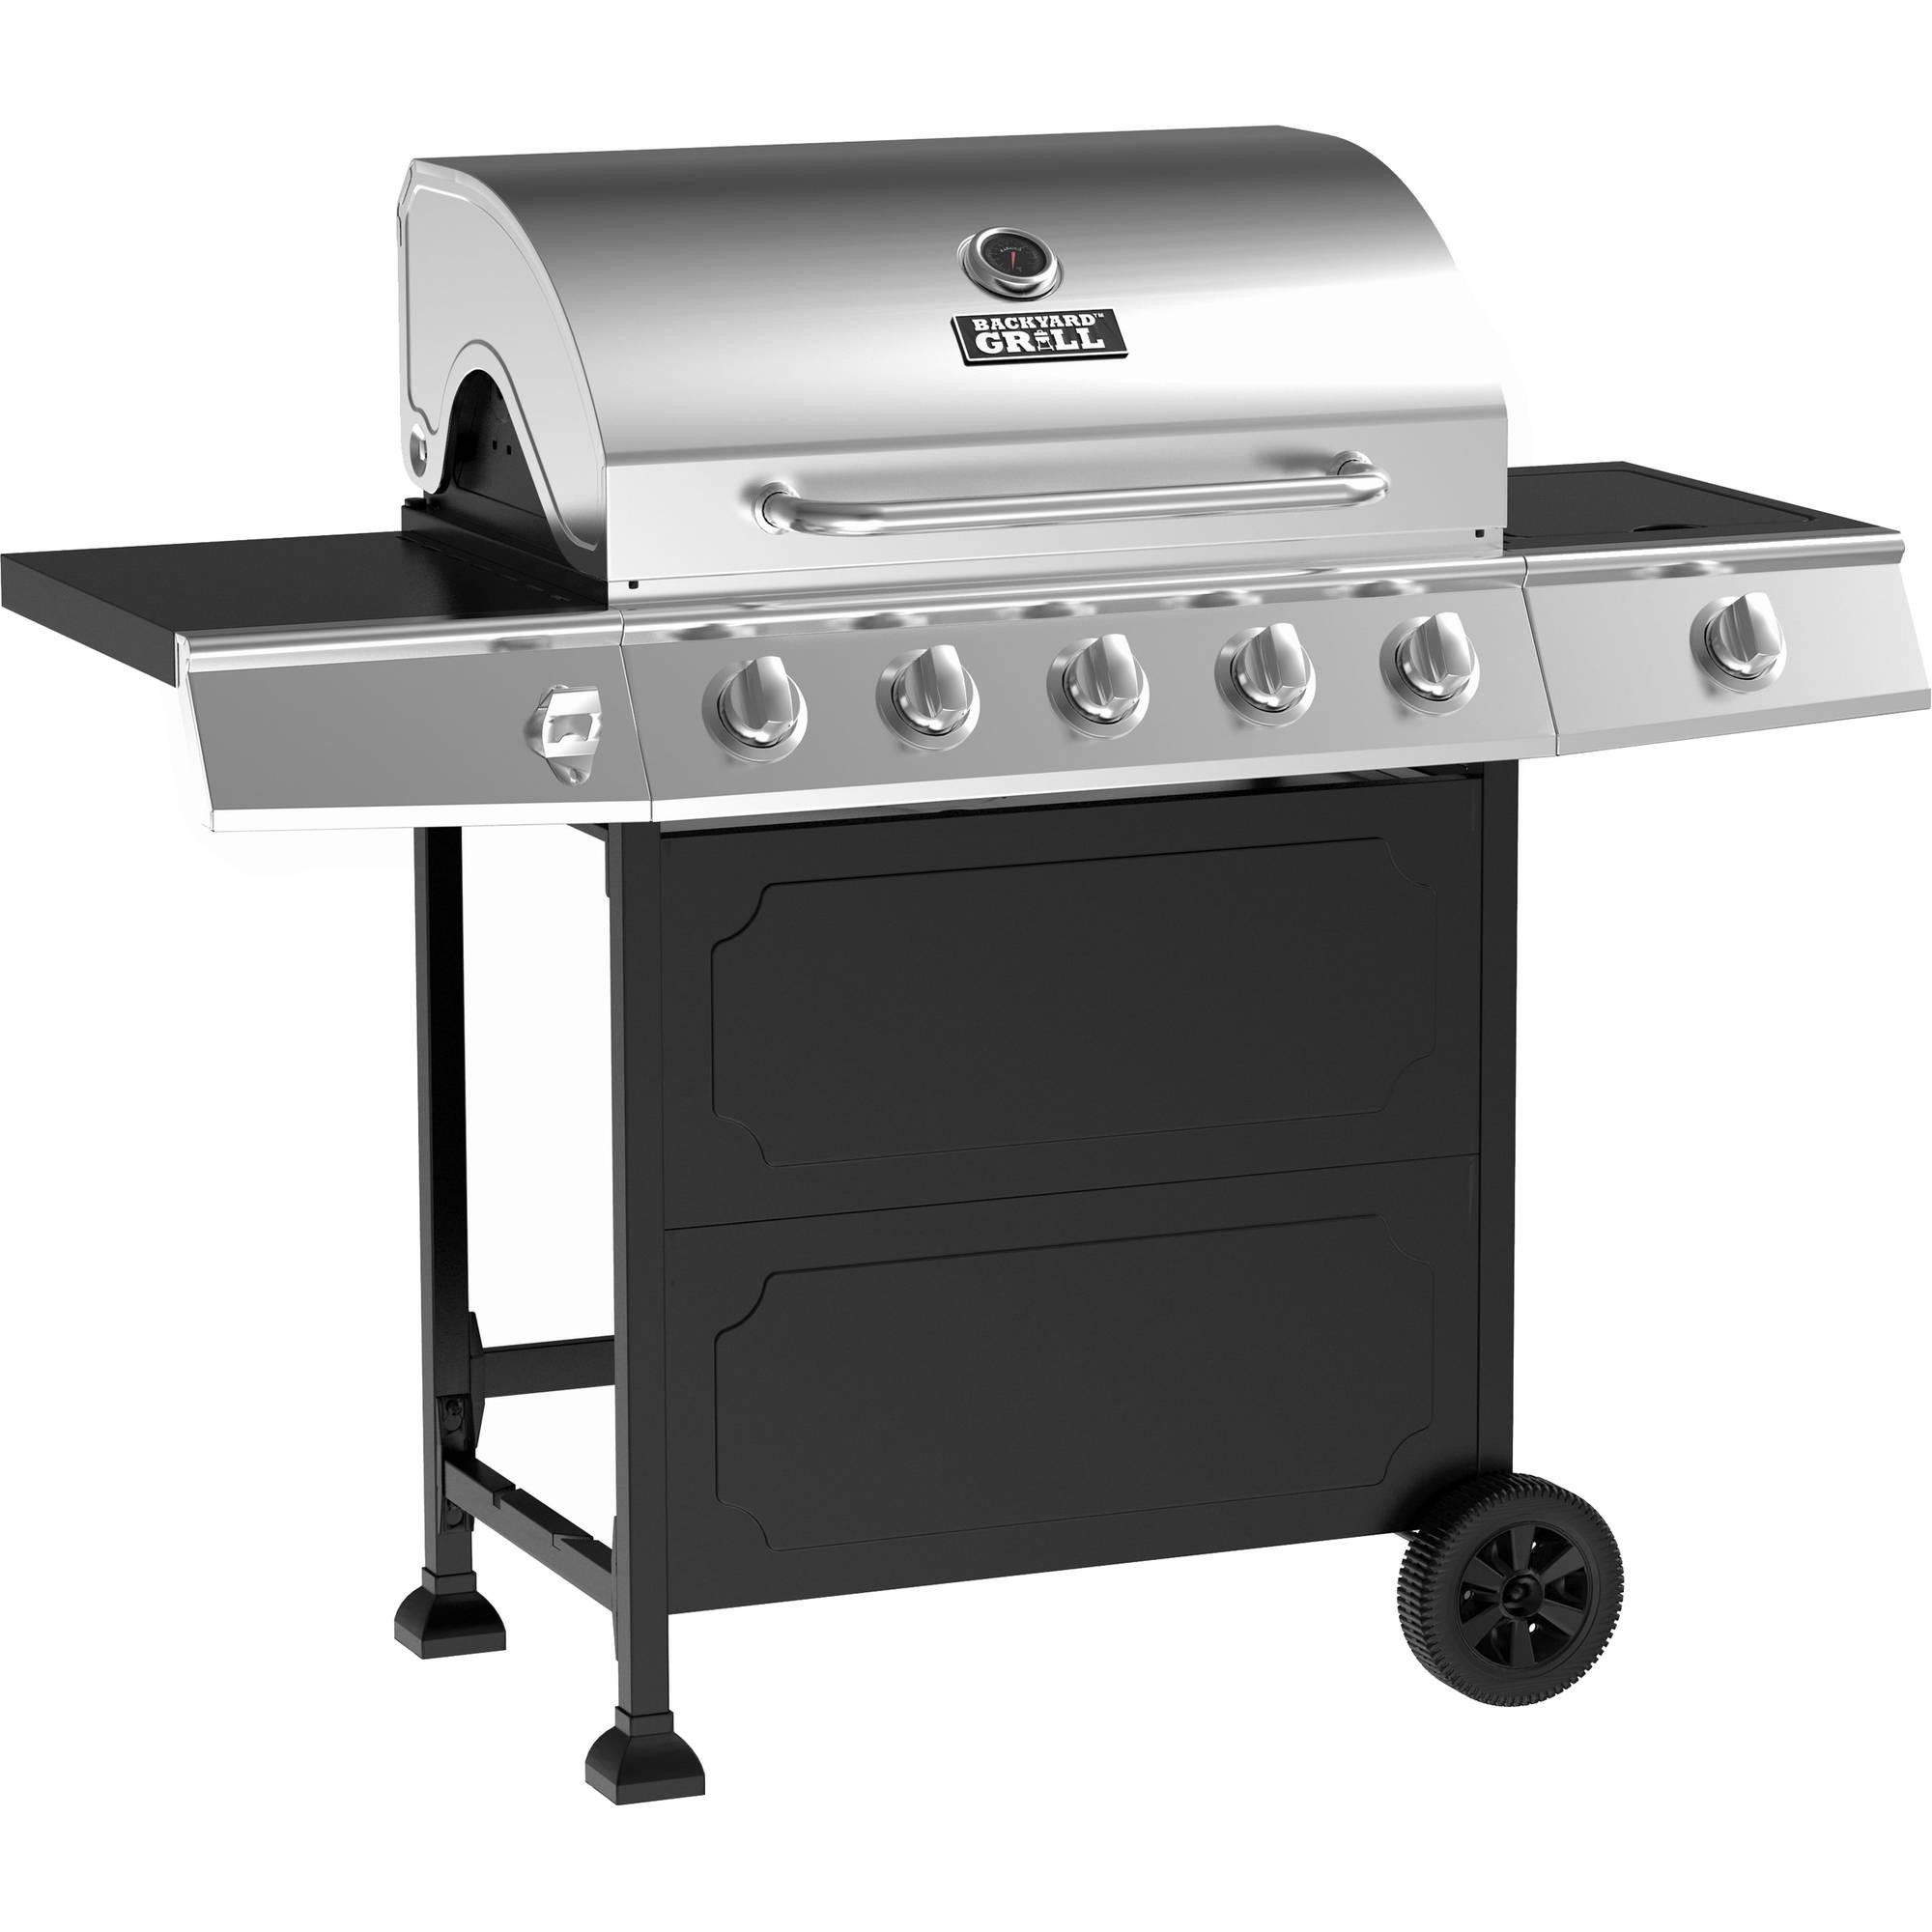 Backyard Grill Grills
 Gas Grills Covers Great Gourmet Griddle Menards Viking